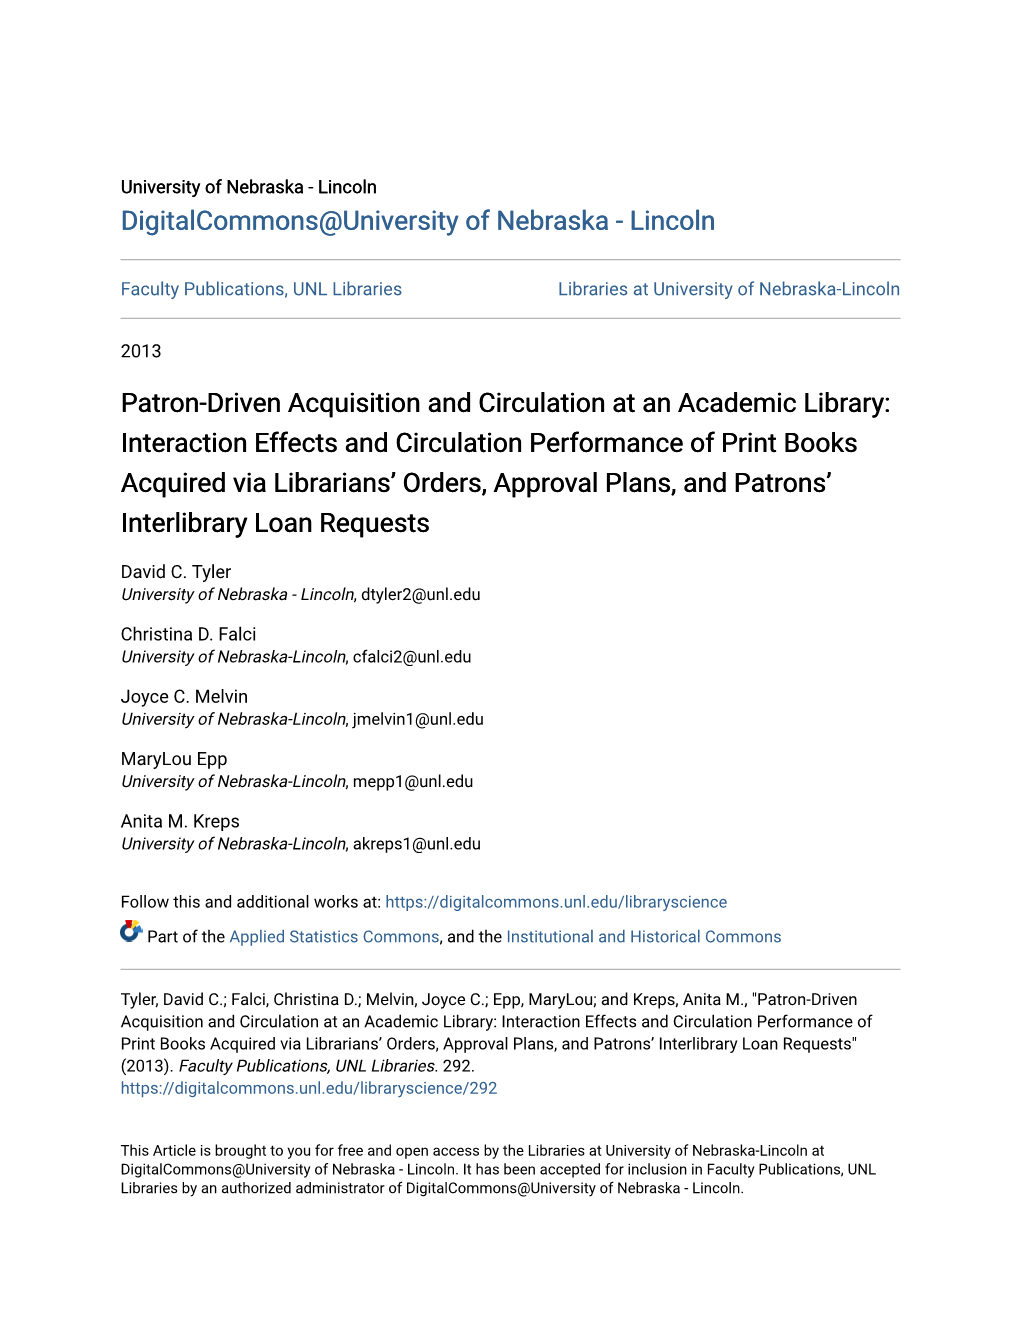 Patron-Driven Acquisition and Circulation at an Academic Library